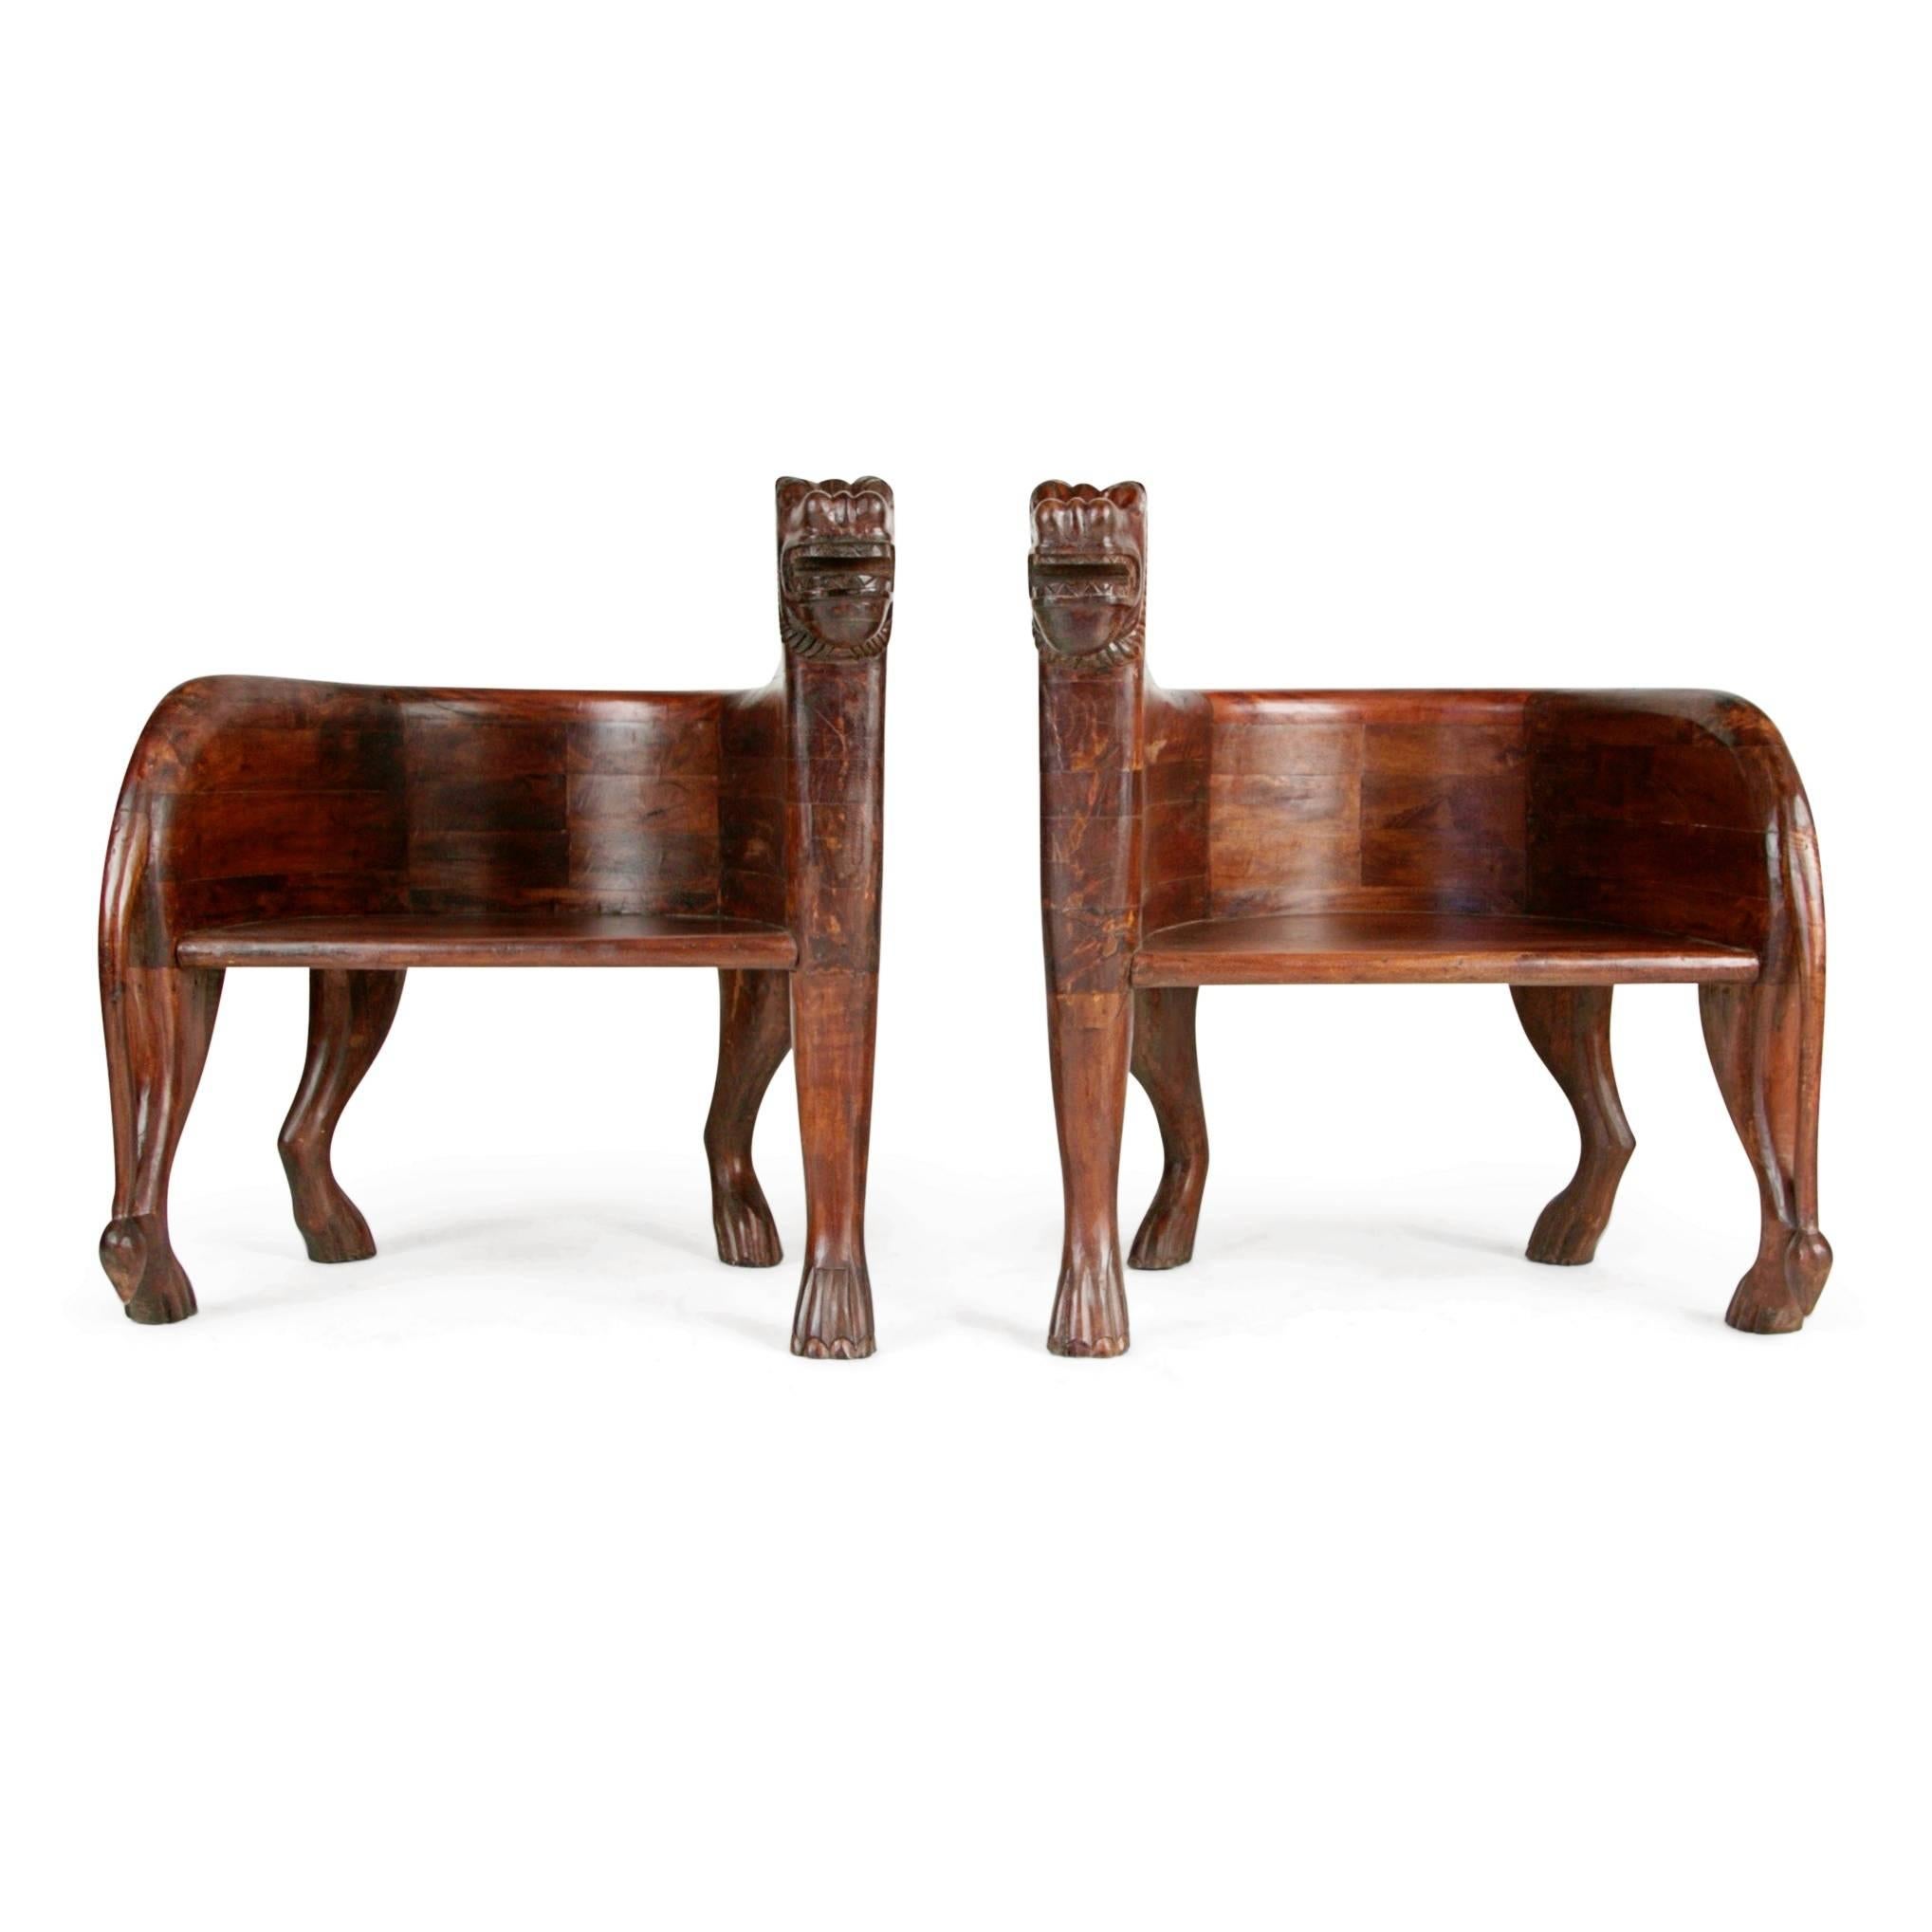 Figural Full Body Carved Teak Lioness Club Chairs 4